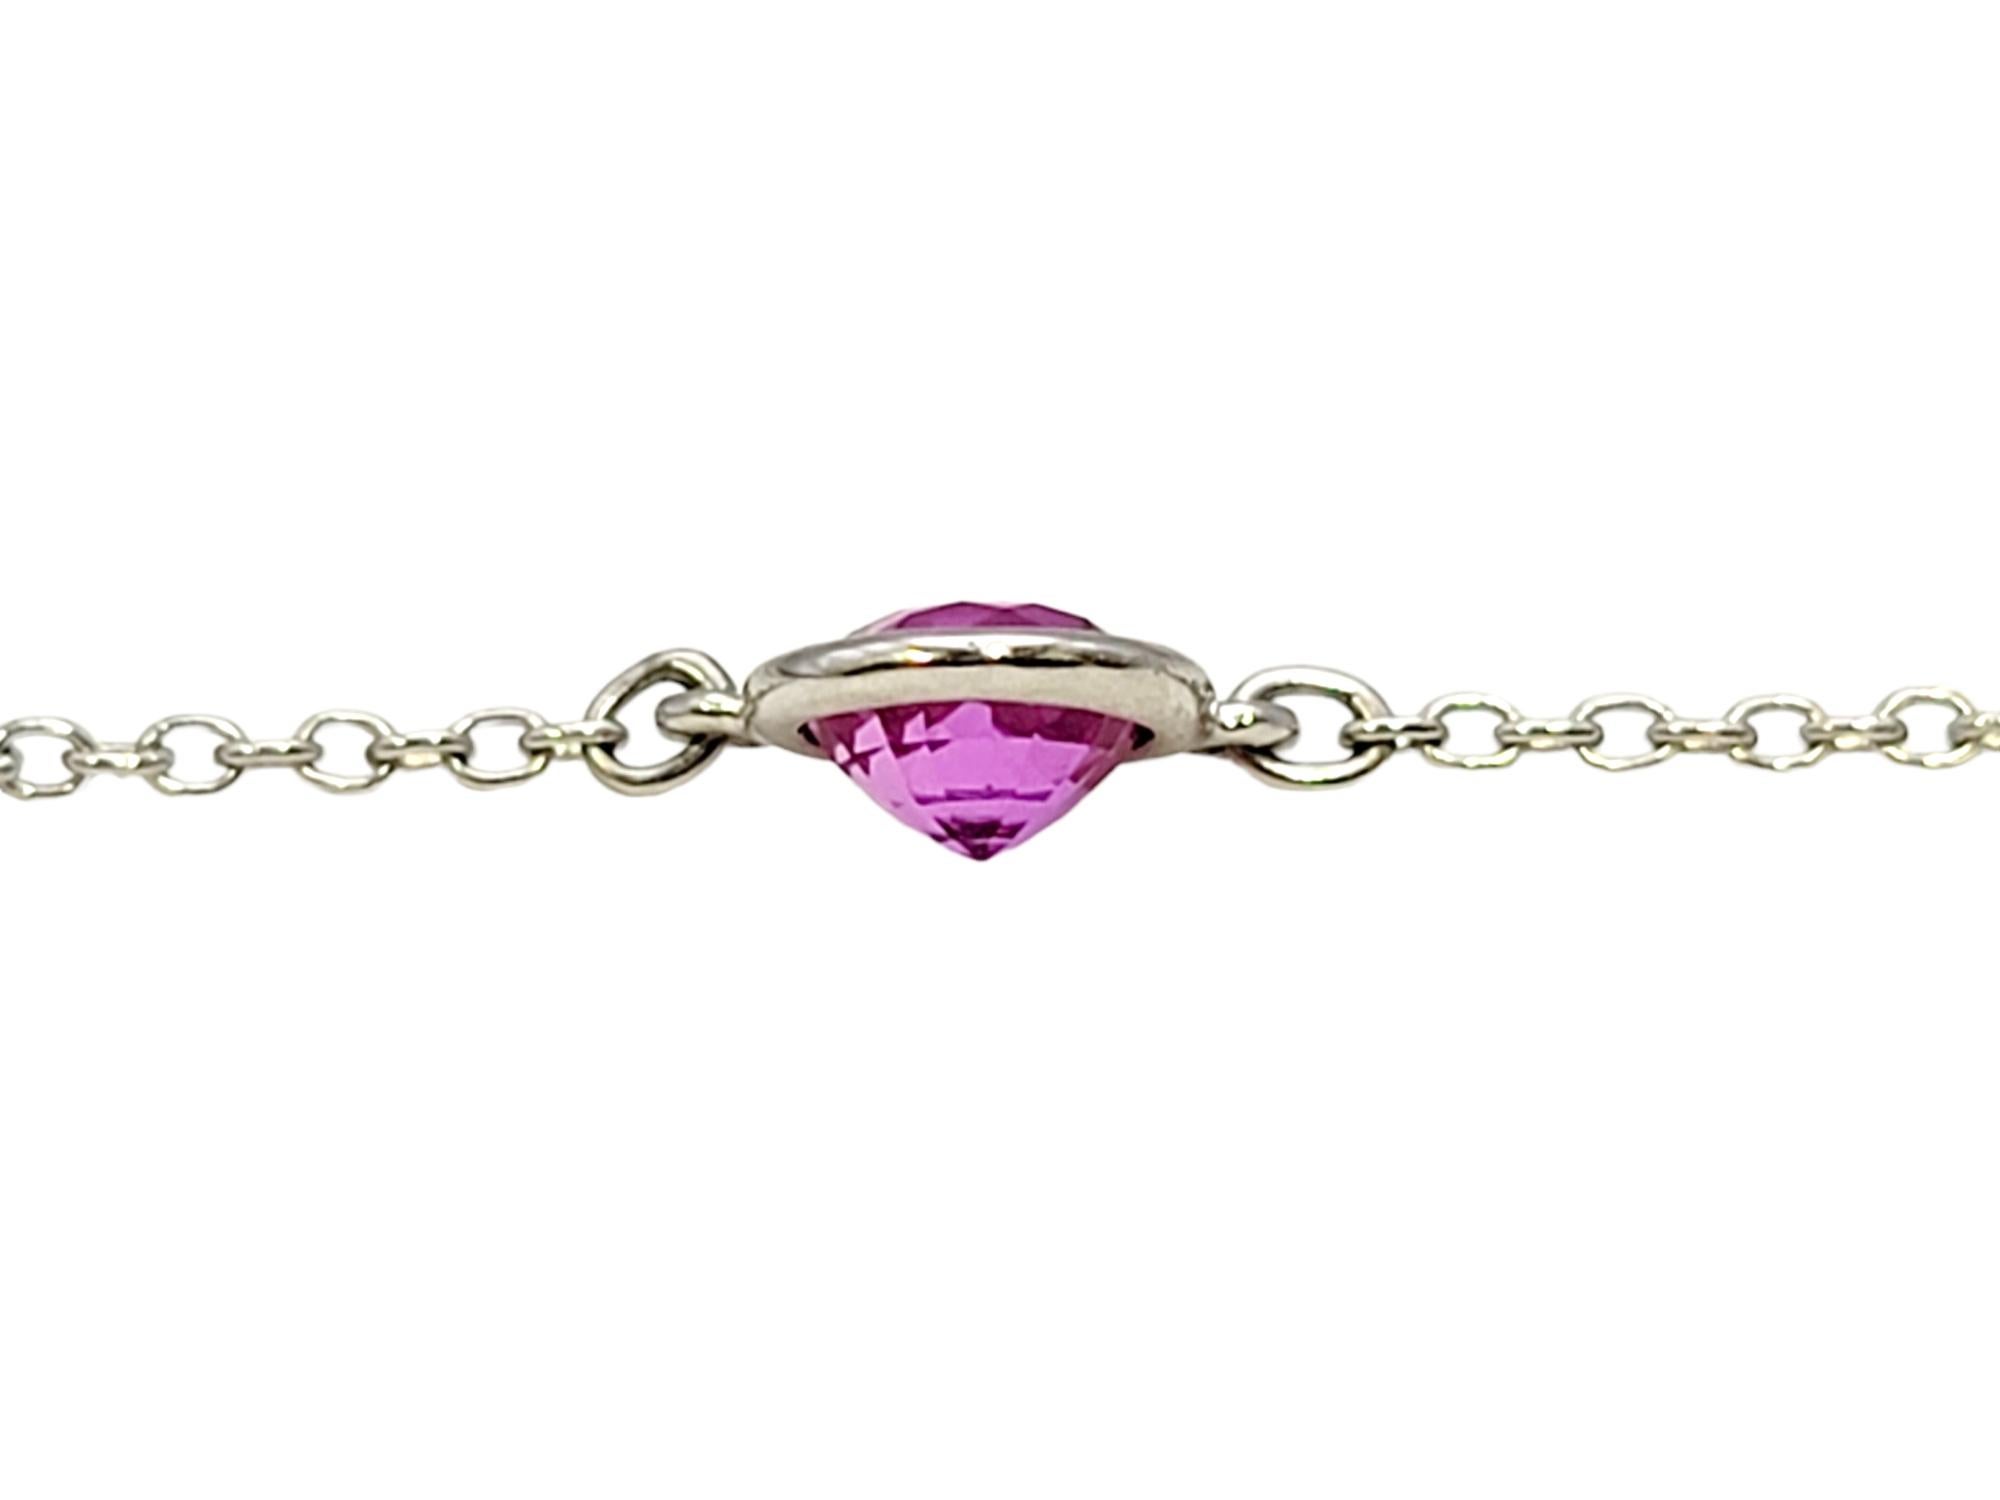 Tiffany & Co. Elsa Peretti Color by the Yard Collier solitaire en saphir rose 1